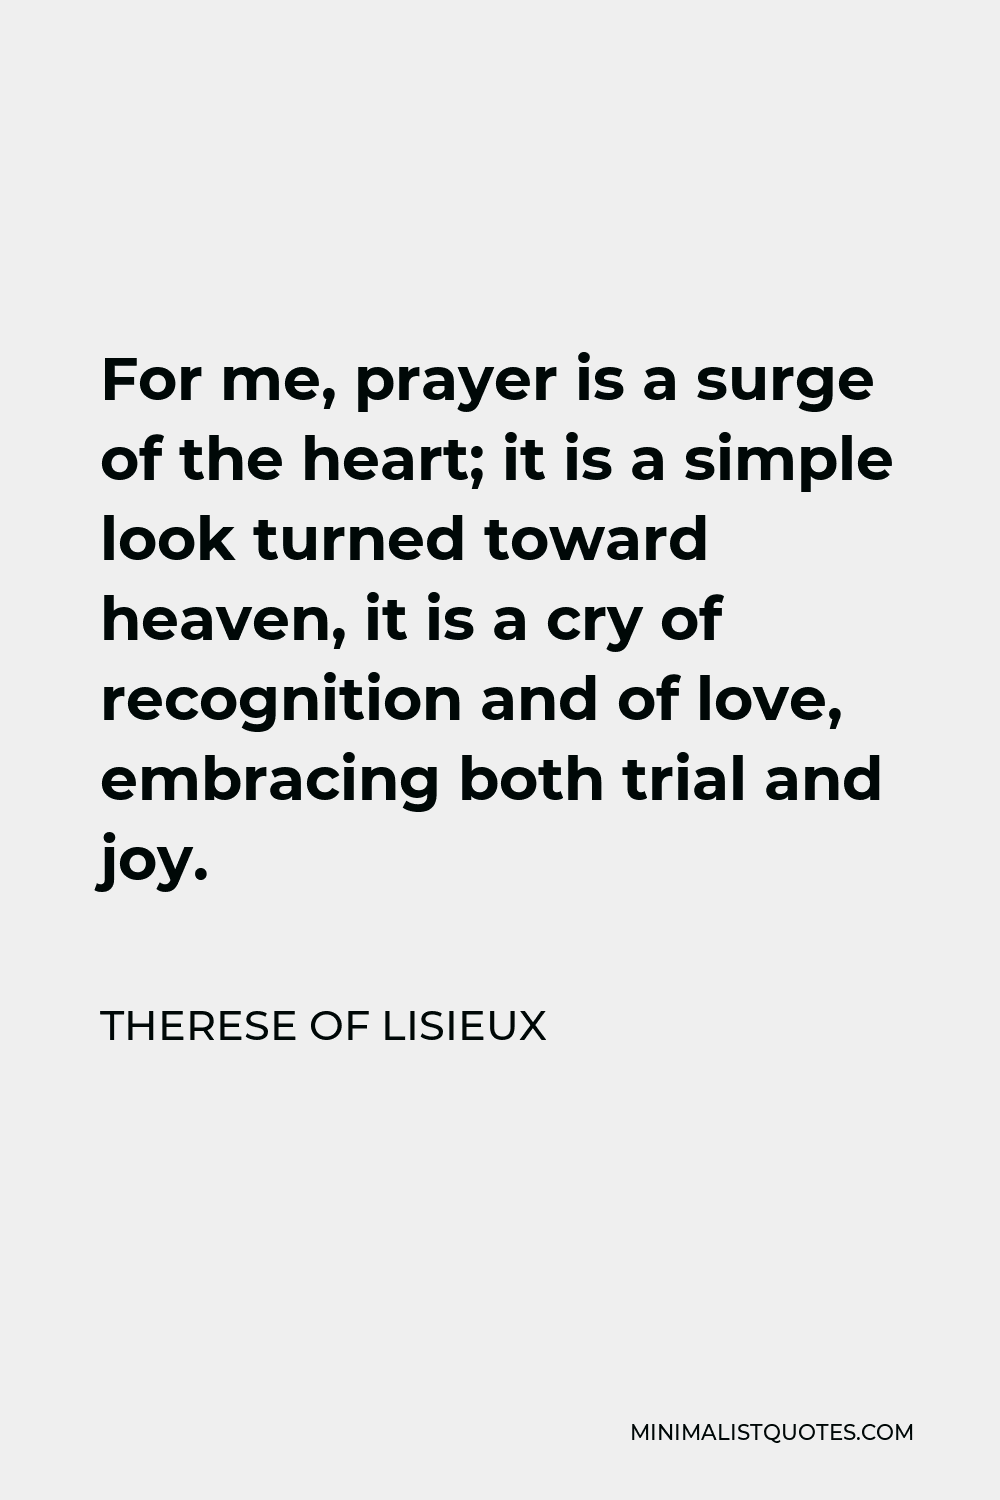 Therese of Lisieux Quote - For me, prayer is a surge of the heart; it is a simple look turned toward heaven, it is a cry of recognition and of love, embracing both trial and joy.